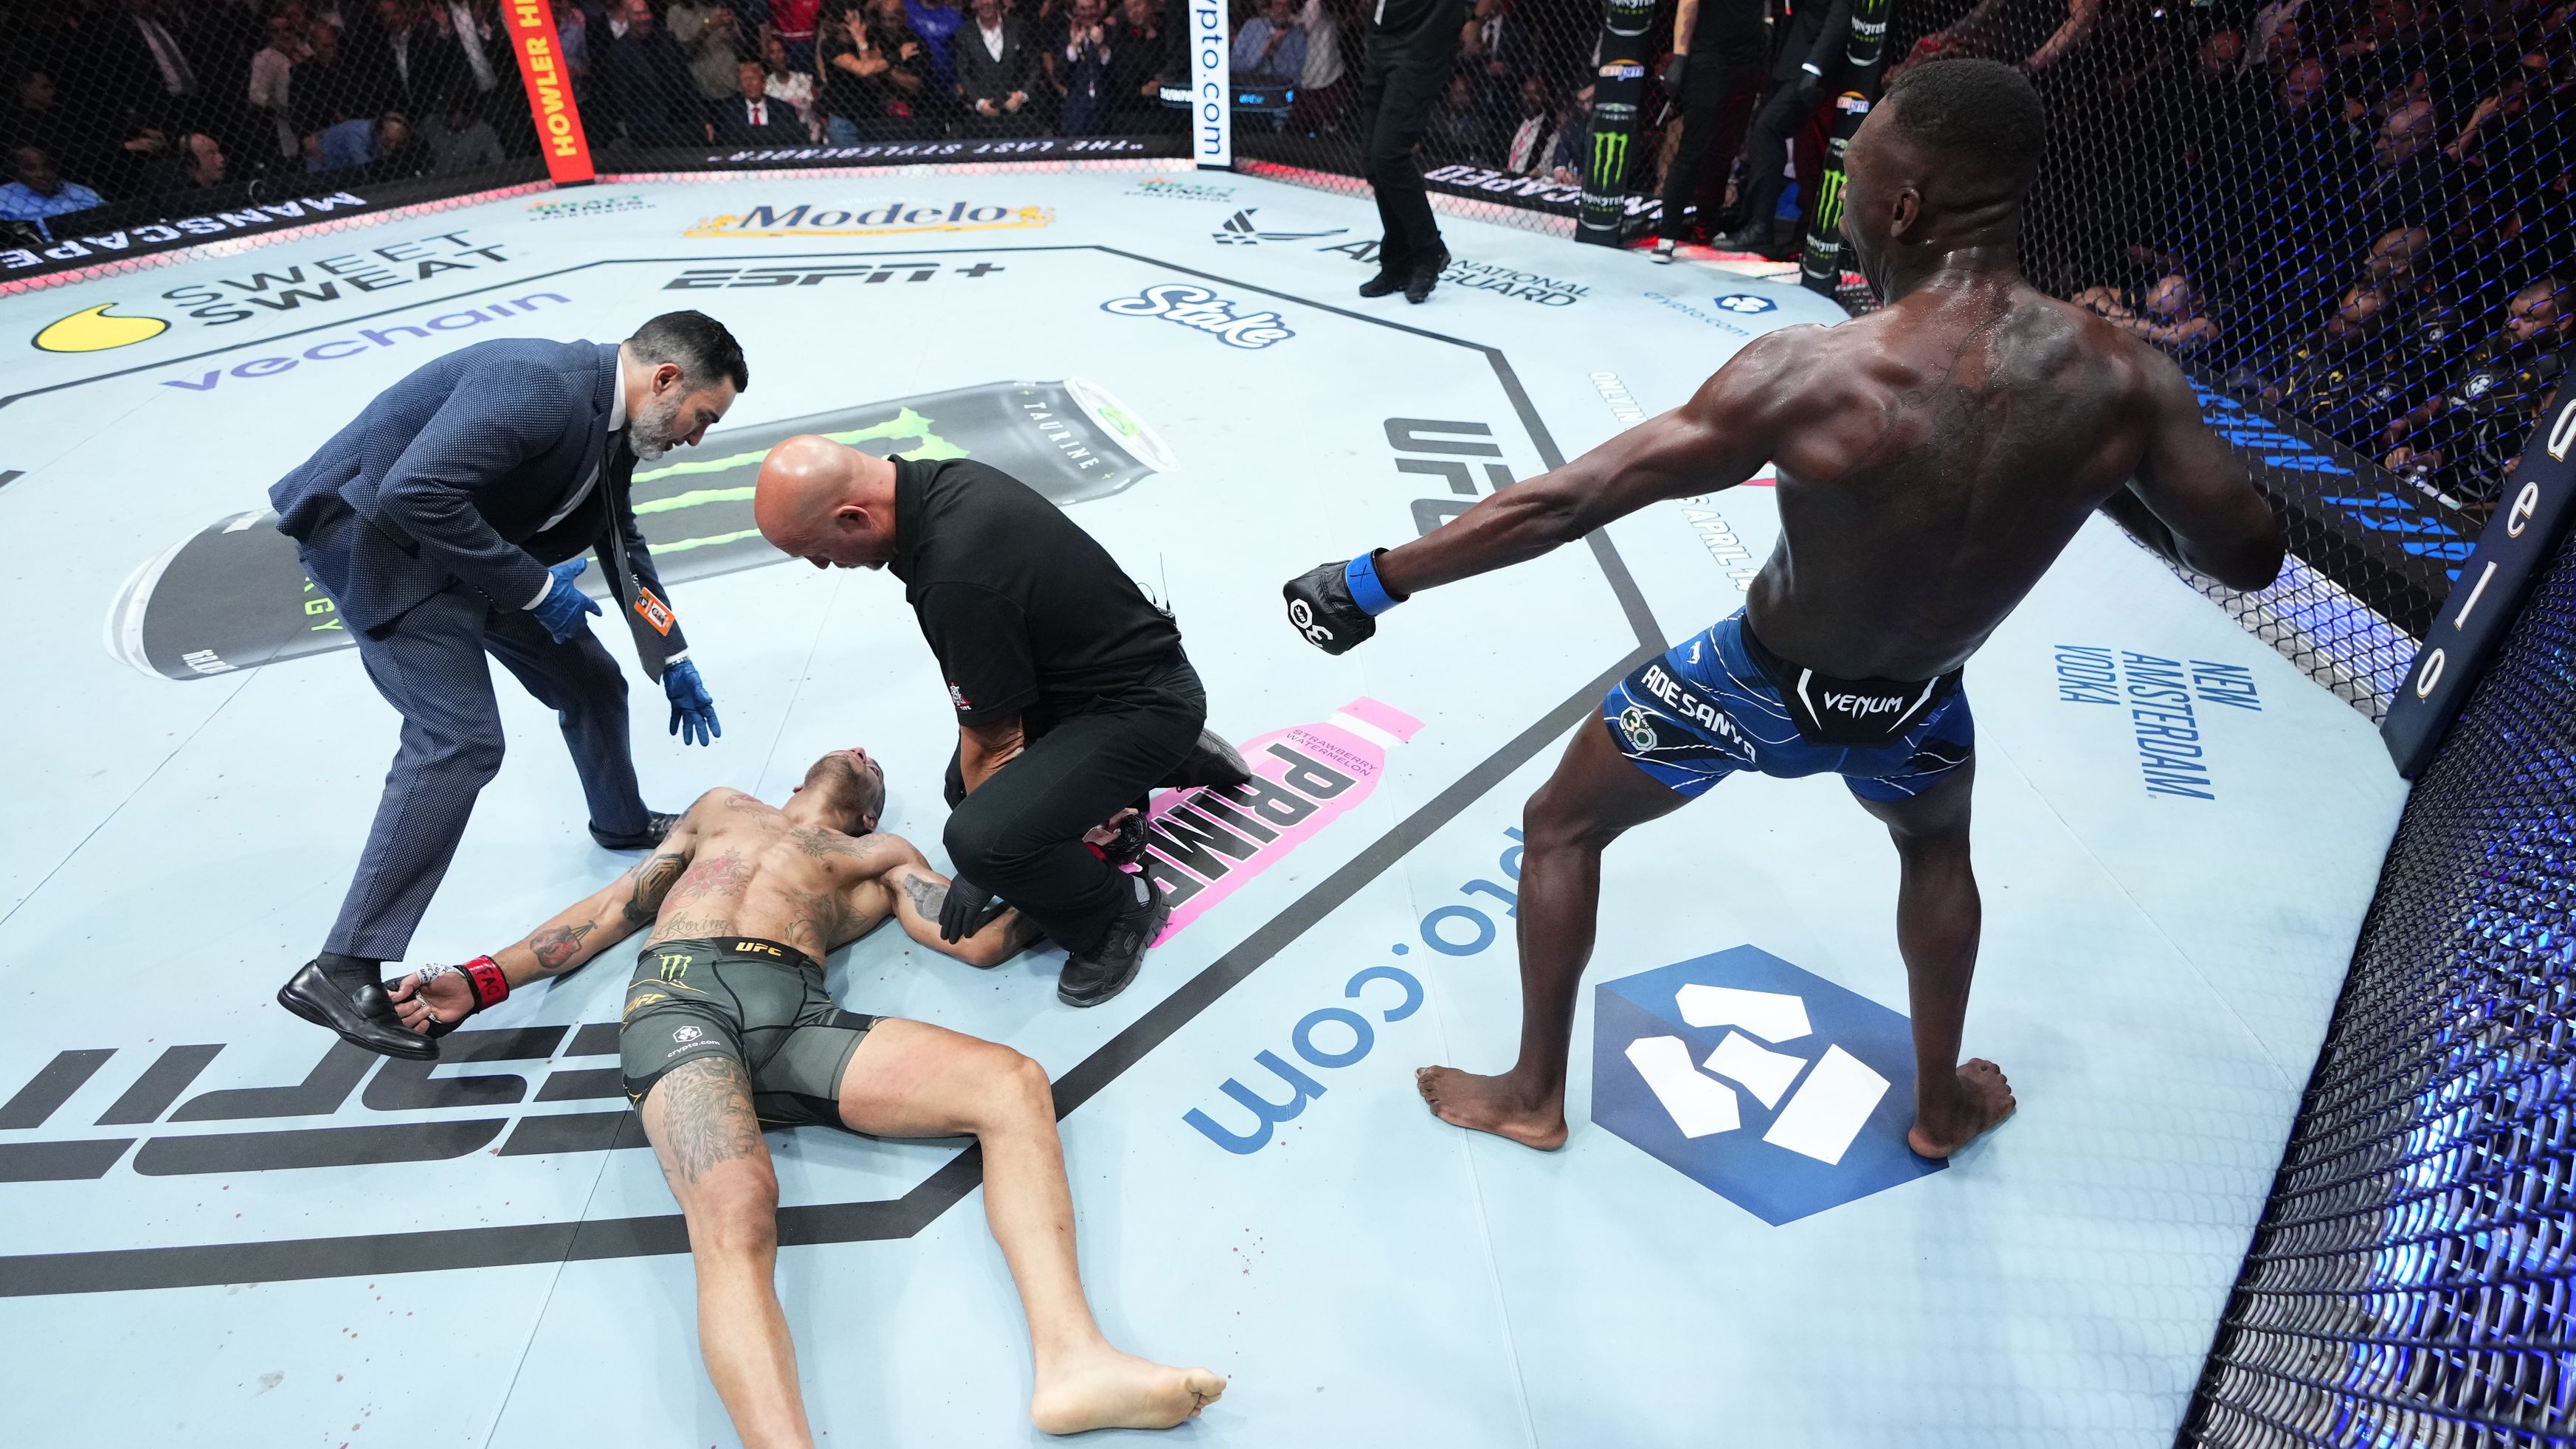 Israel Adesanya reacts after knocking out Alex Pereira in the UFC middleweight championship fight during the UFC 287 event.